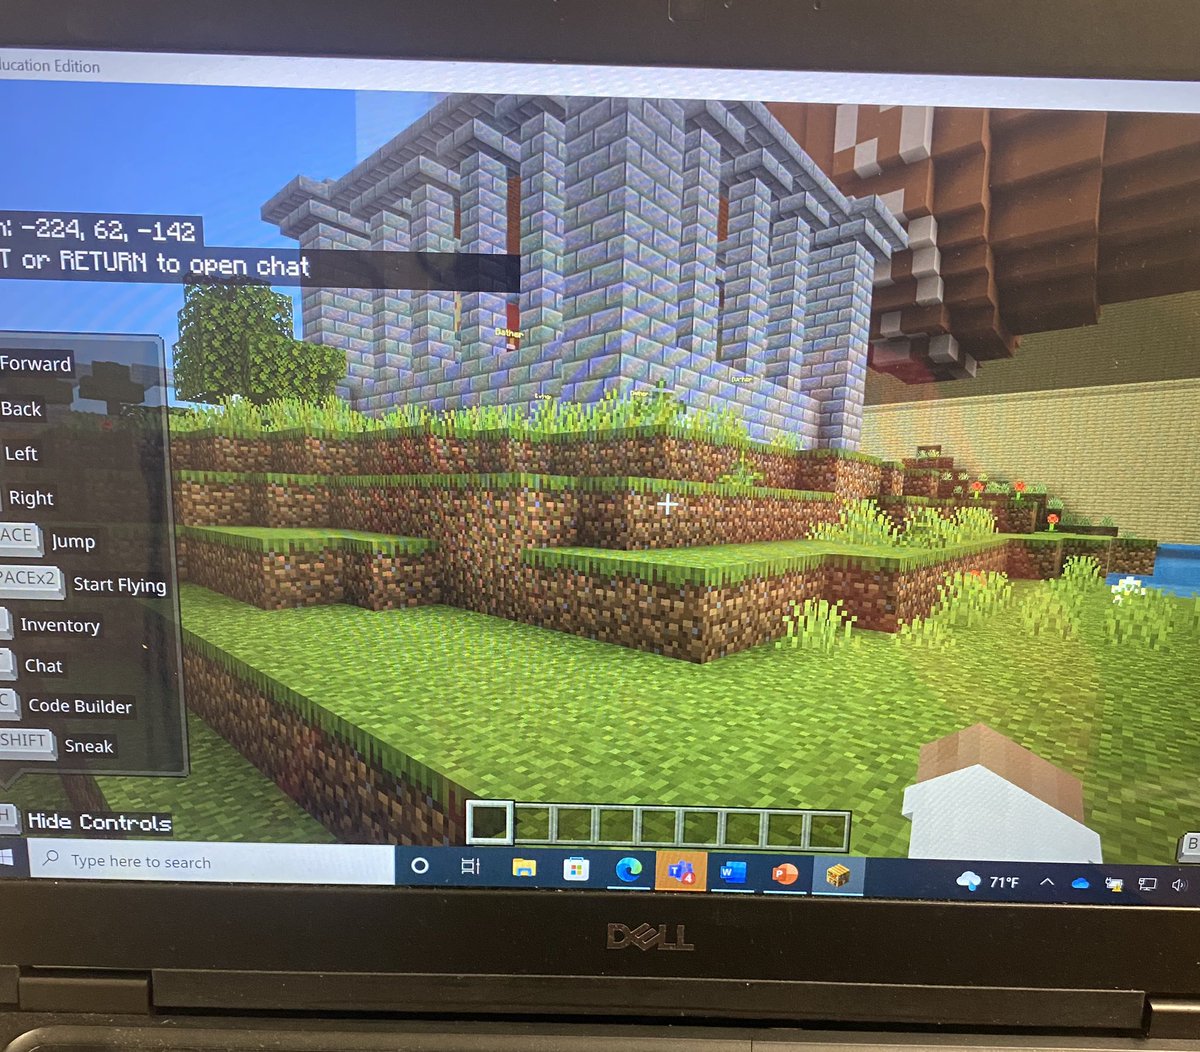 So excited! Today is my first day teaching a Minecraft lesson with my students. I’m sure they will teach me a few things also. Thanks Minecraft Global Virtual Teacher Academy. @butterflynix @playcraftlearn @NpkStem #MinecraftEdu #MCTA5